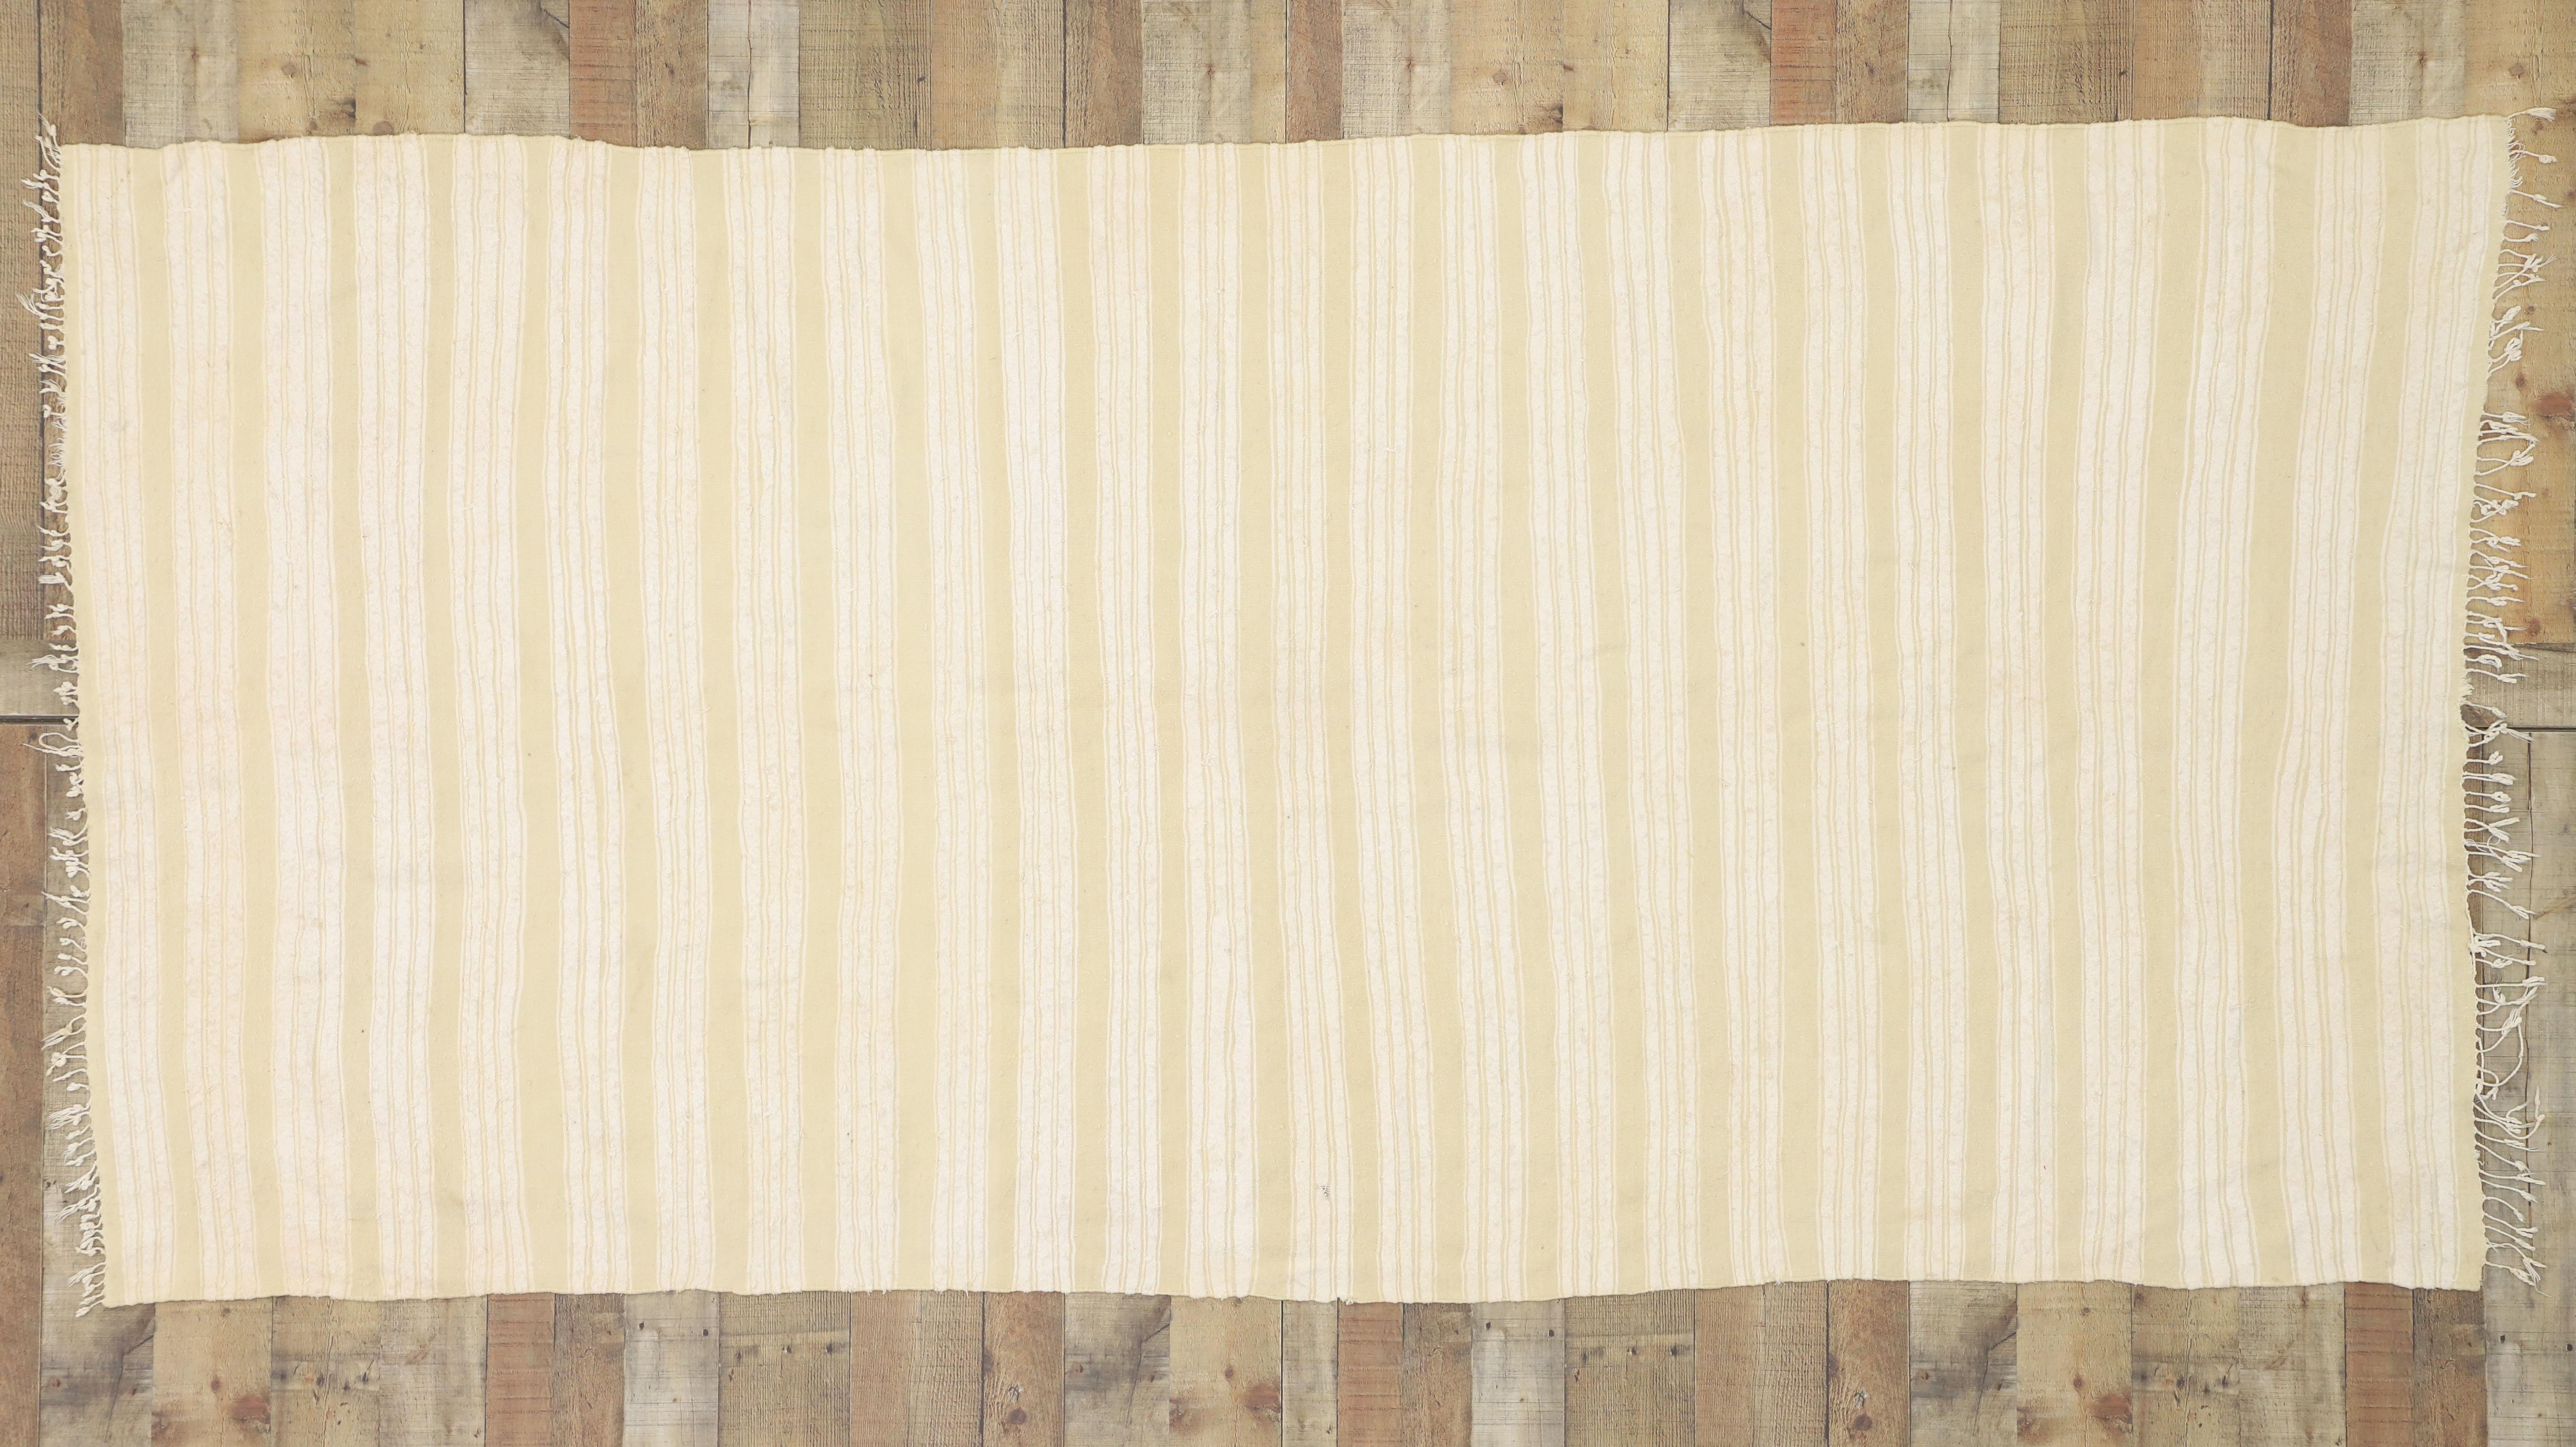 Wool Vintage Moroccan Kilim Rug with Minimalist Scandinavian Style, Neutral Color Rug For Sale